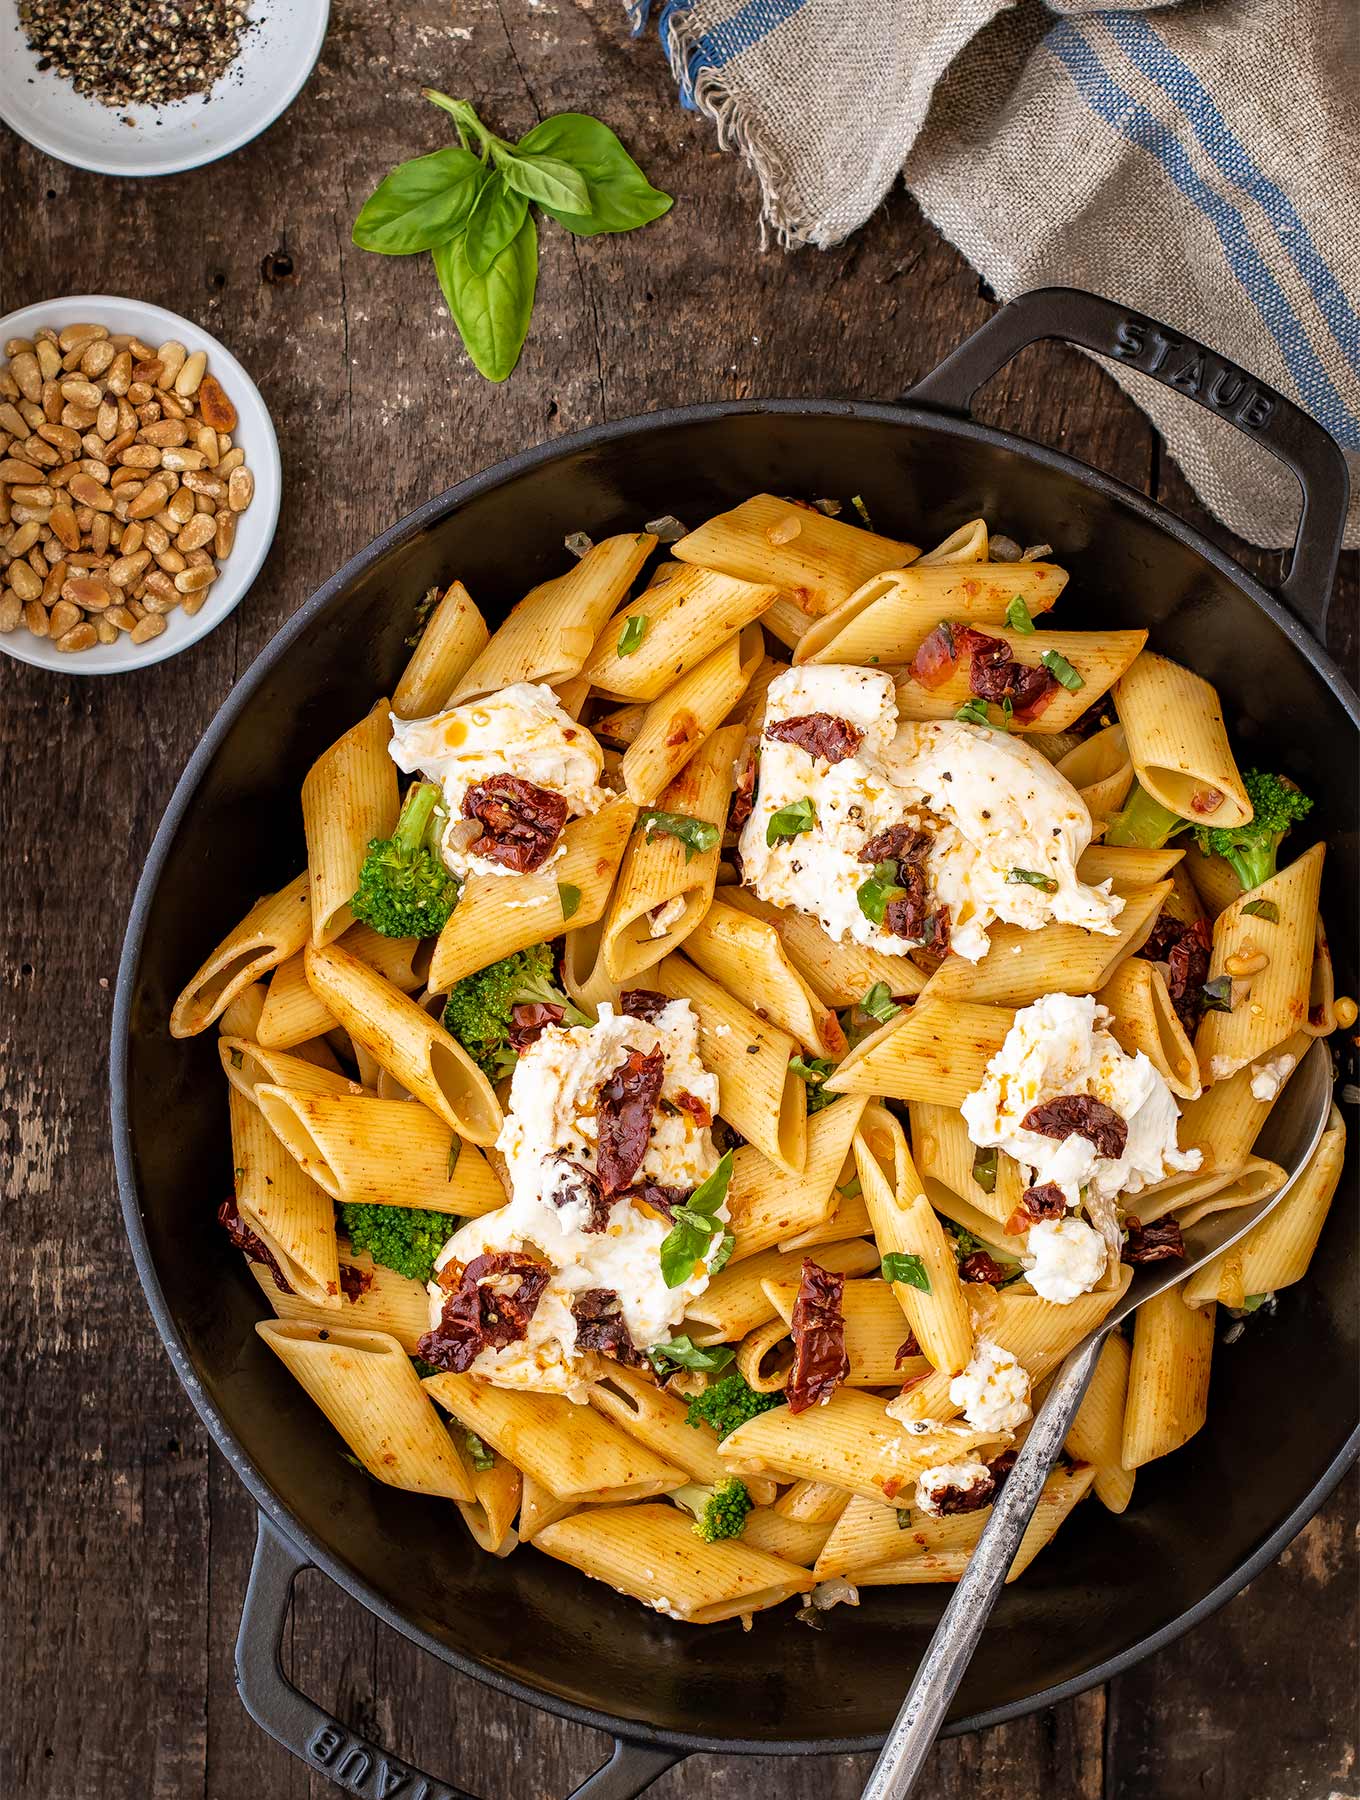 Skillet of pasta with sun dried tomatoes, broccoli and burrata